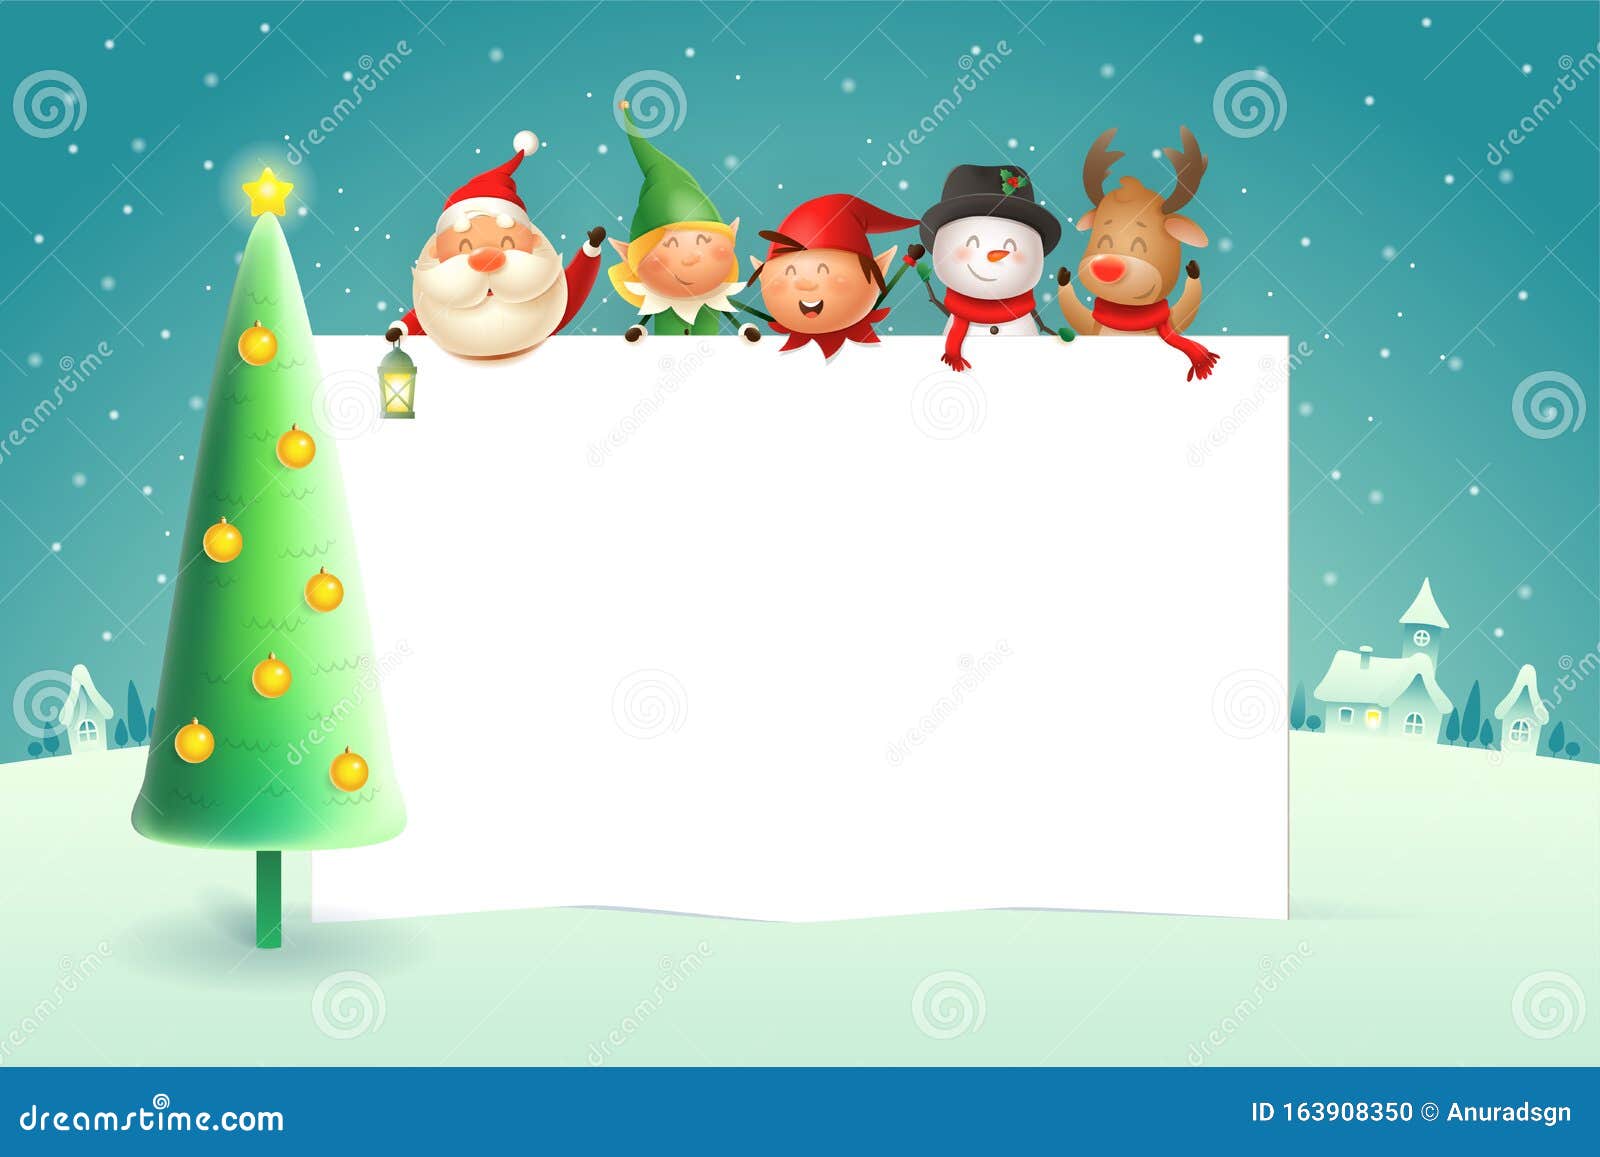 christmas poster template with santa claus elves snowman reindeer and christmas tree - winter landscape on background